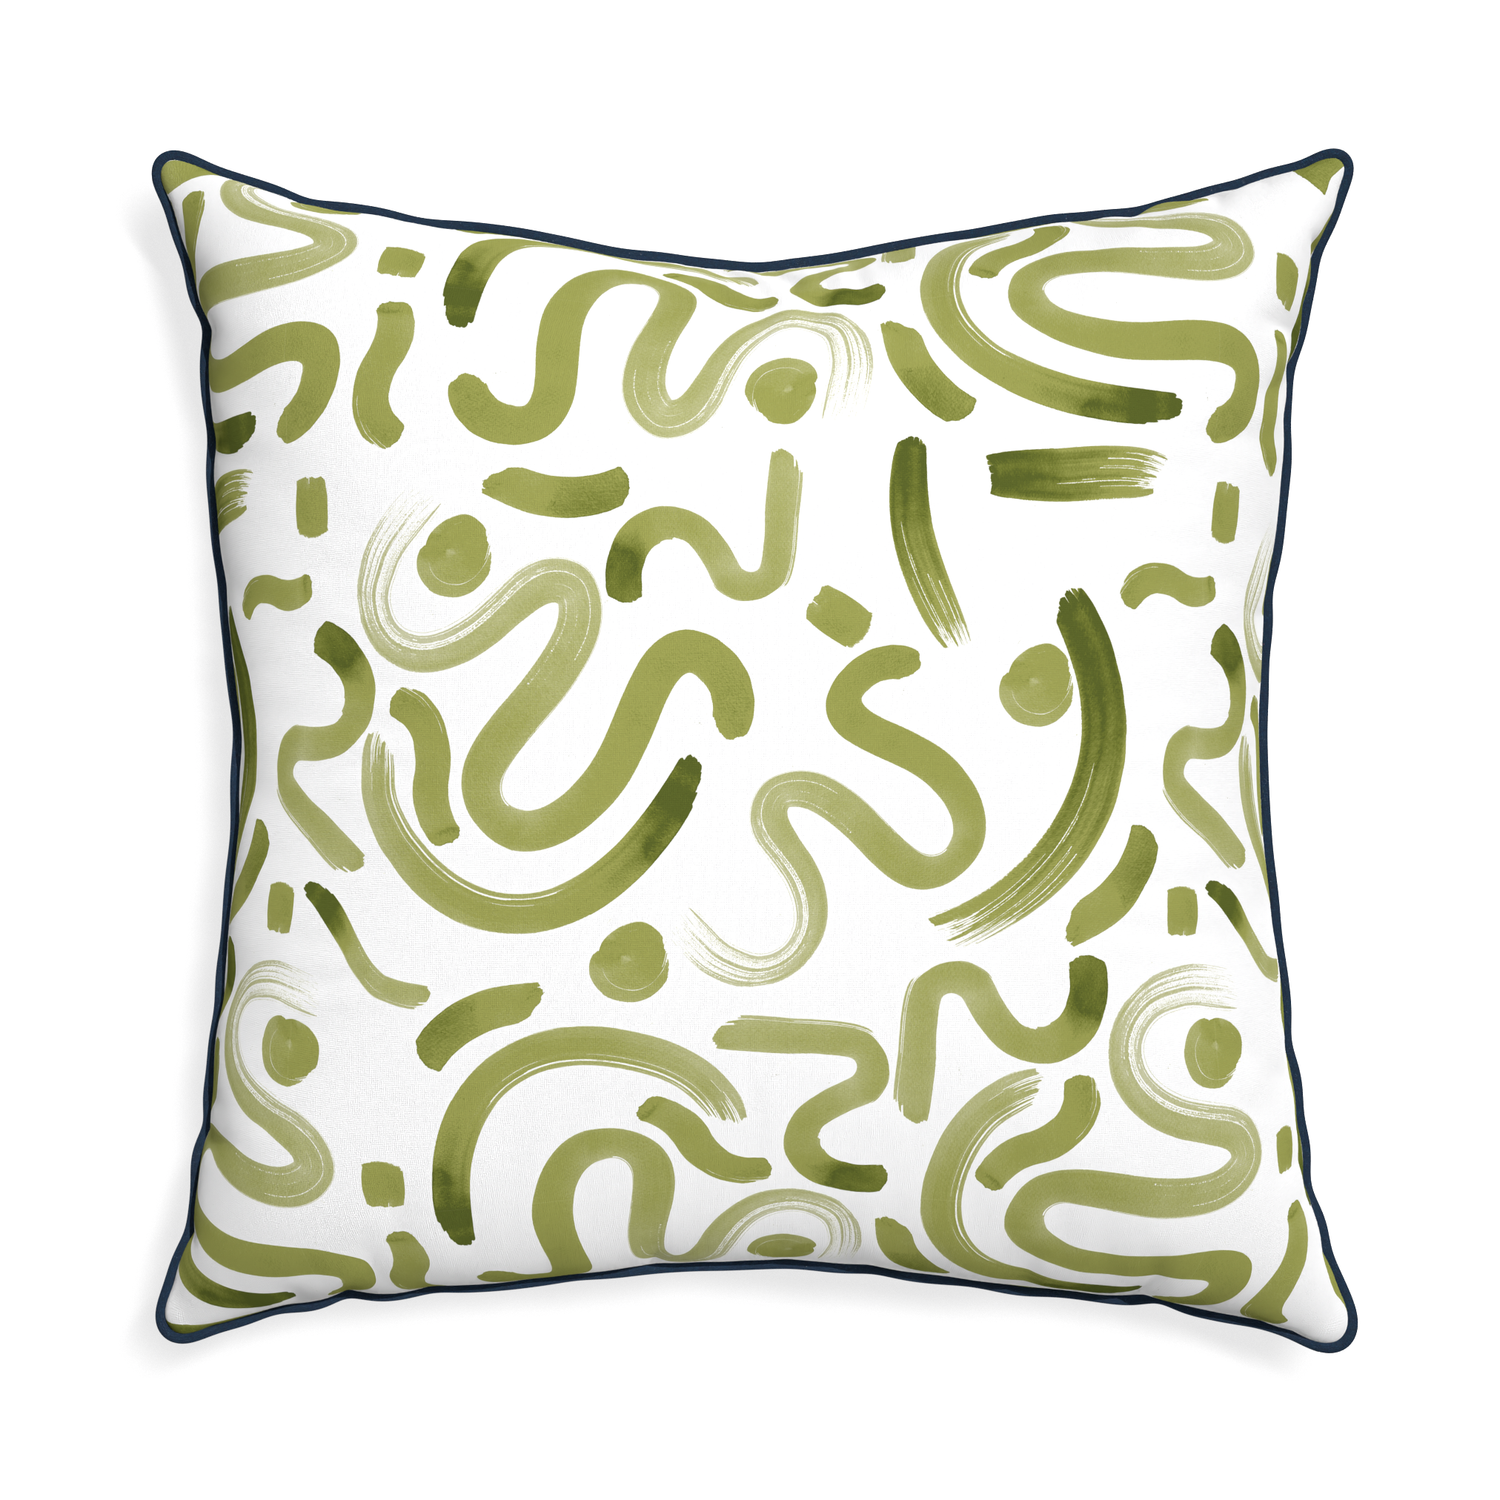 Euro-sham hockney moss custom moss greenpillow with c piping on white background